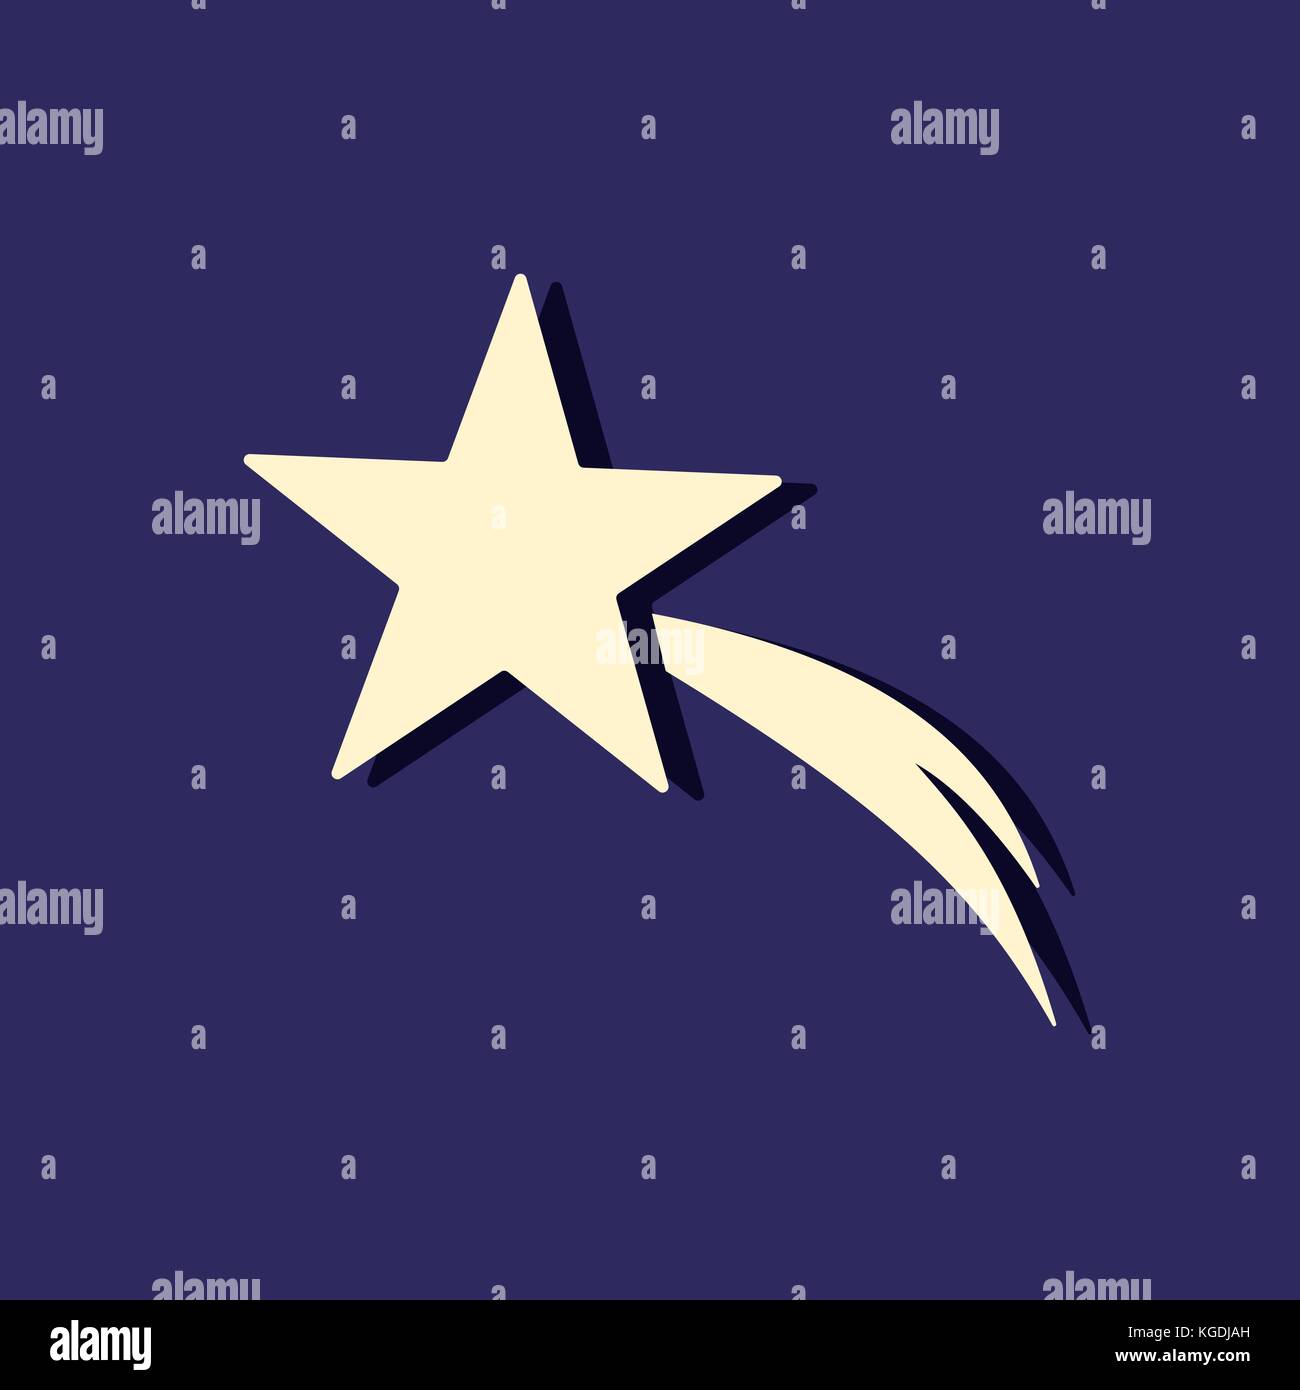 Christmas star icon in the night sky. Vector illustration Stock Vector